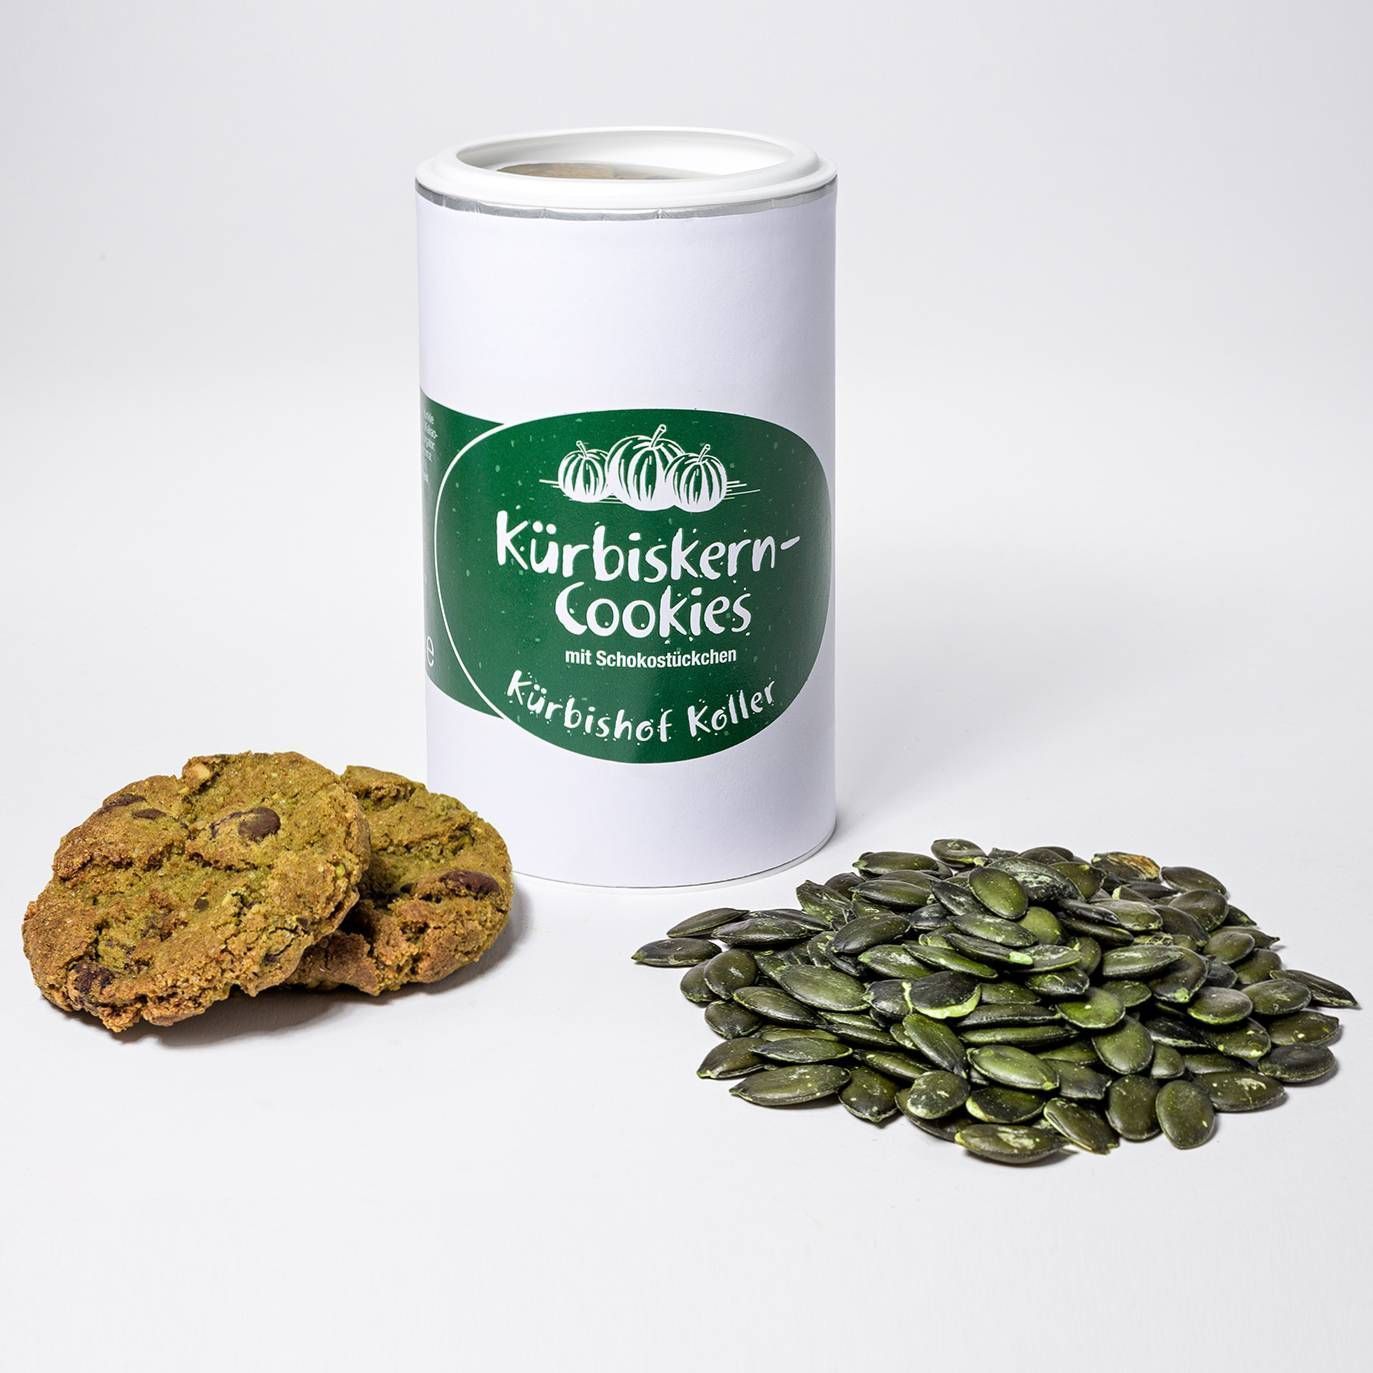 Pumpkin Seed Cookies with Chocolate Chips in Congo